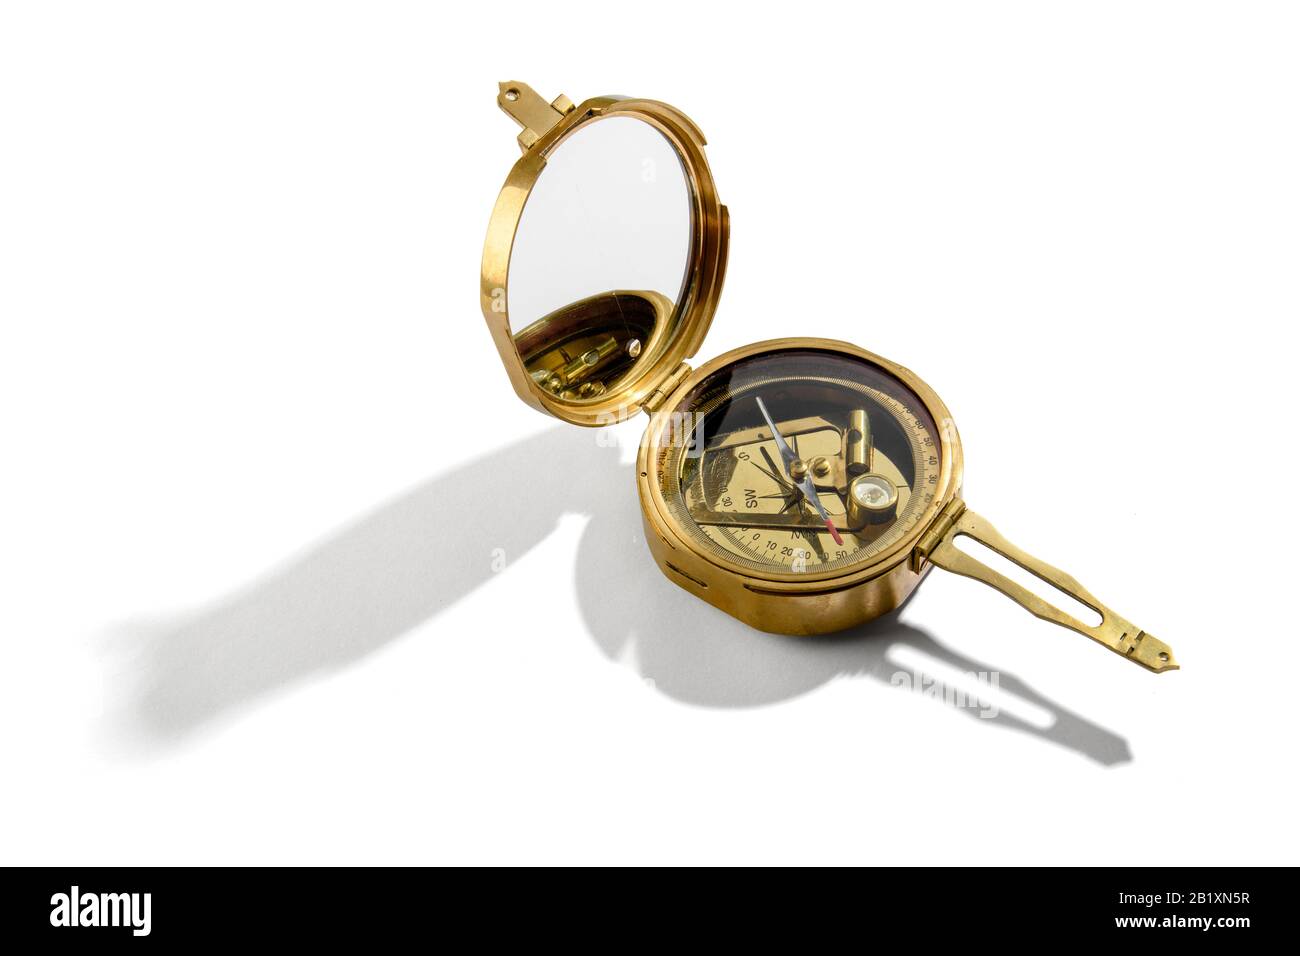 Old vintage brass compass opened up to show the magnetic needle inside over a white background Stock Photo